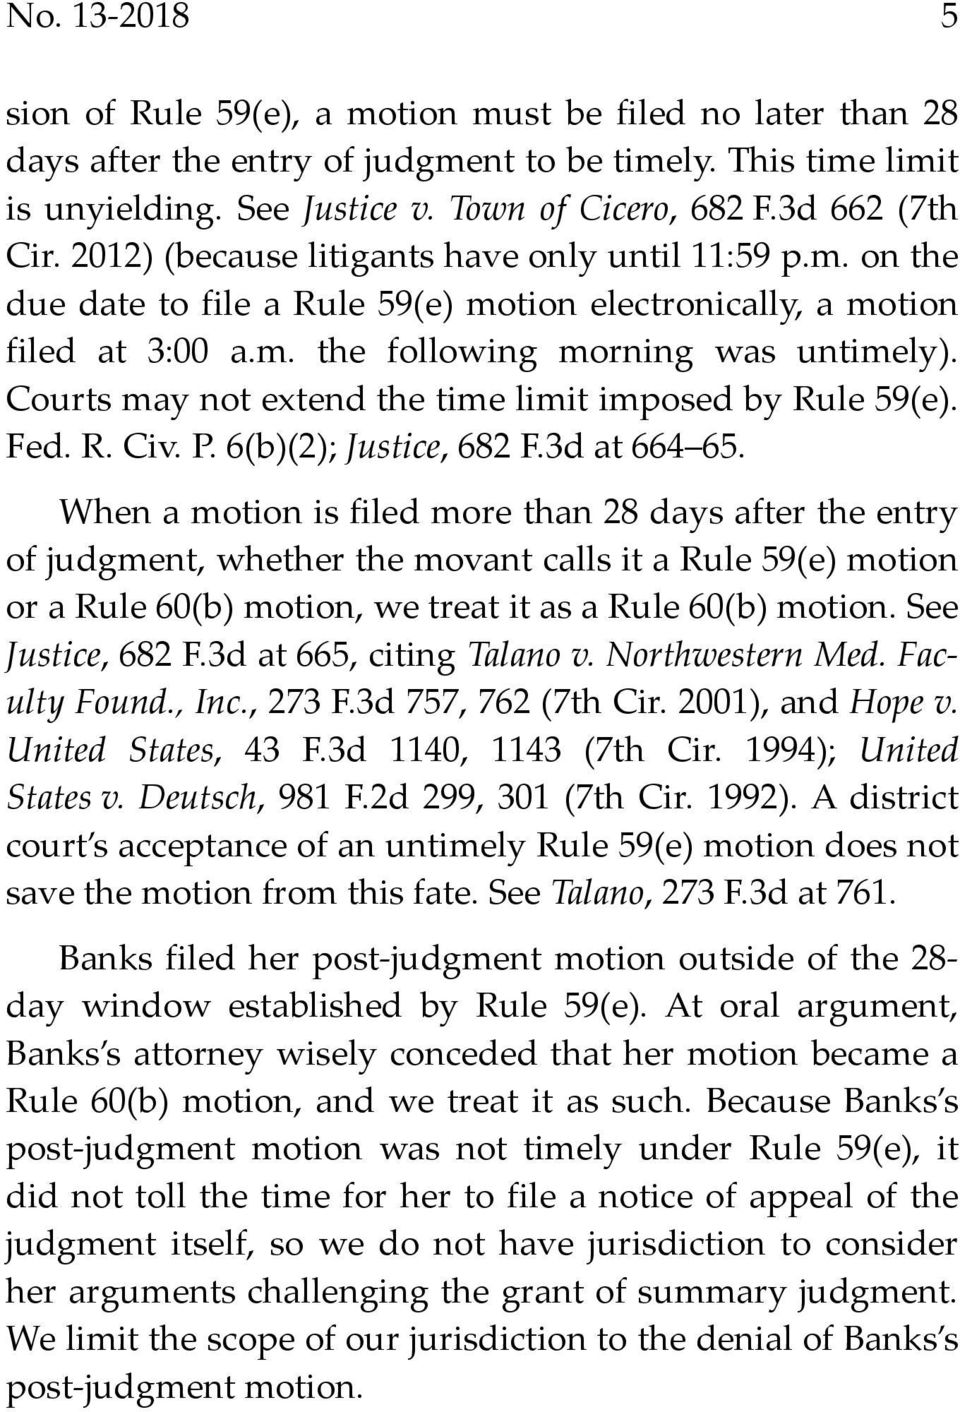 Courts may not extend the time limit imposed by Rule 59(e). Fed. R. Civ. P. 6(b)(2); Justice, 682 F.3d at 664 65.